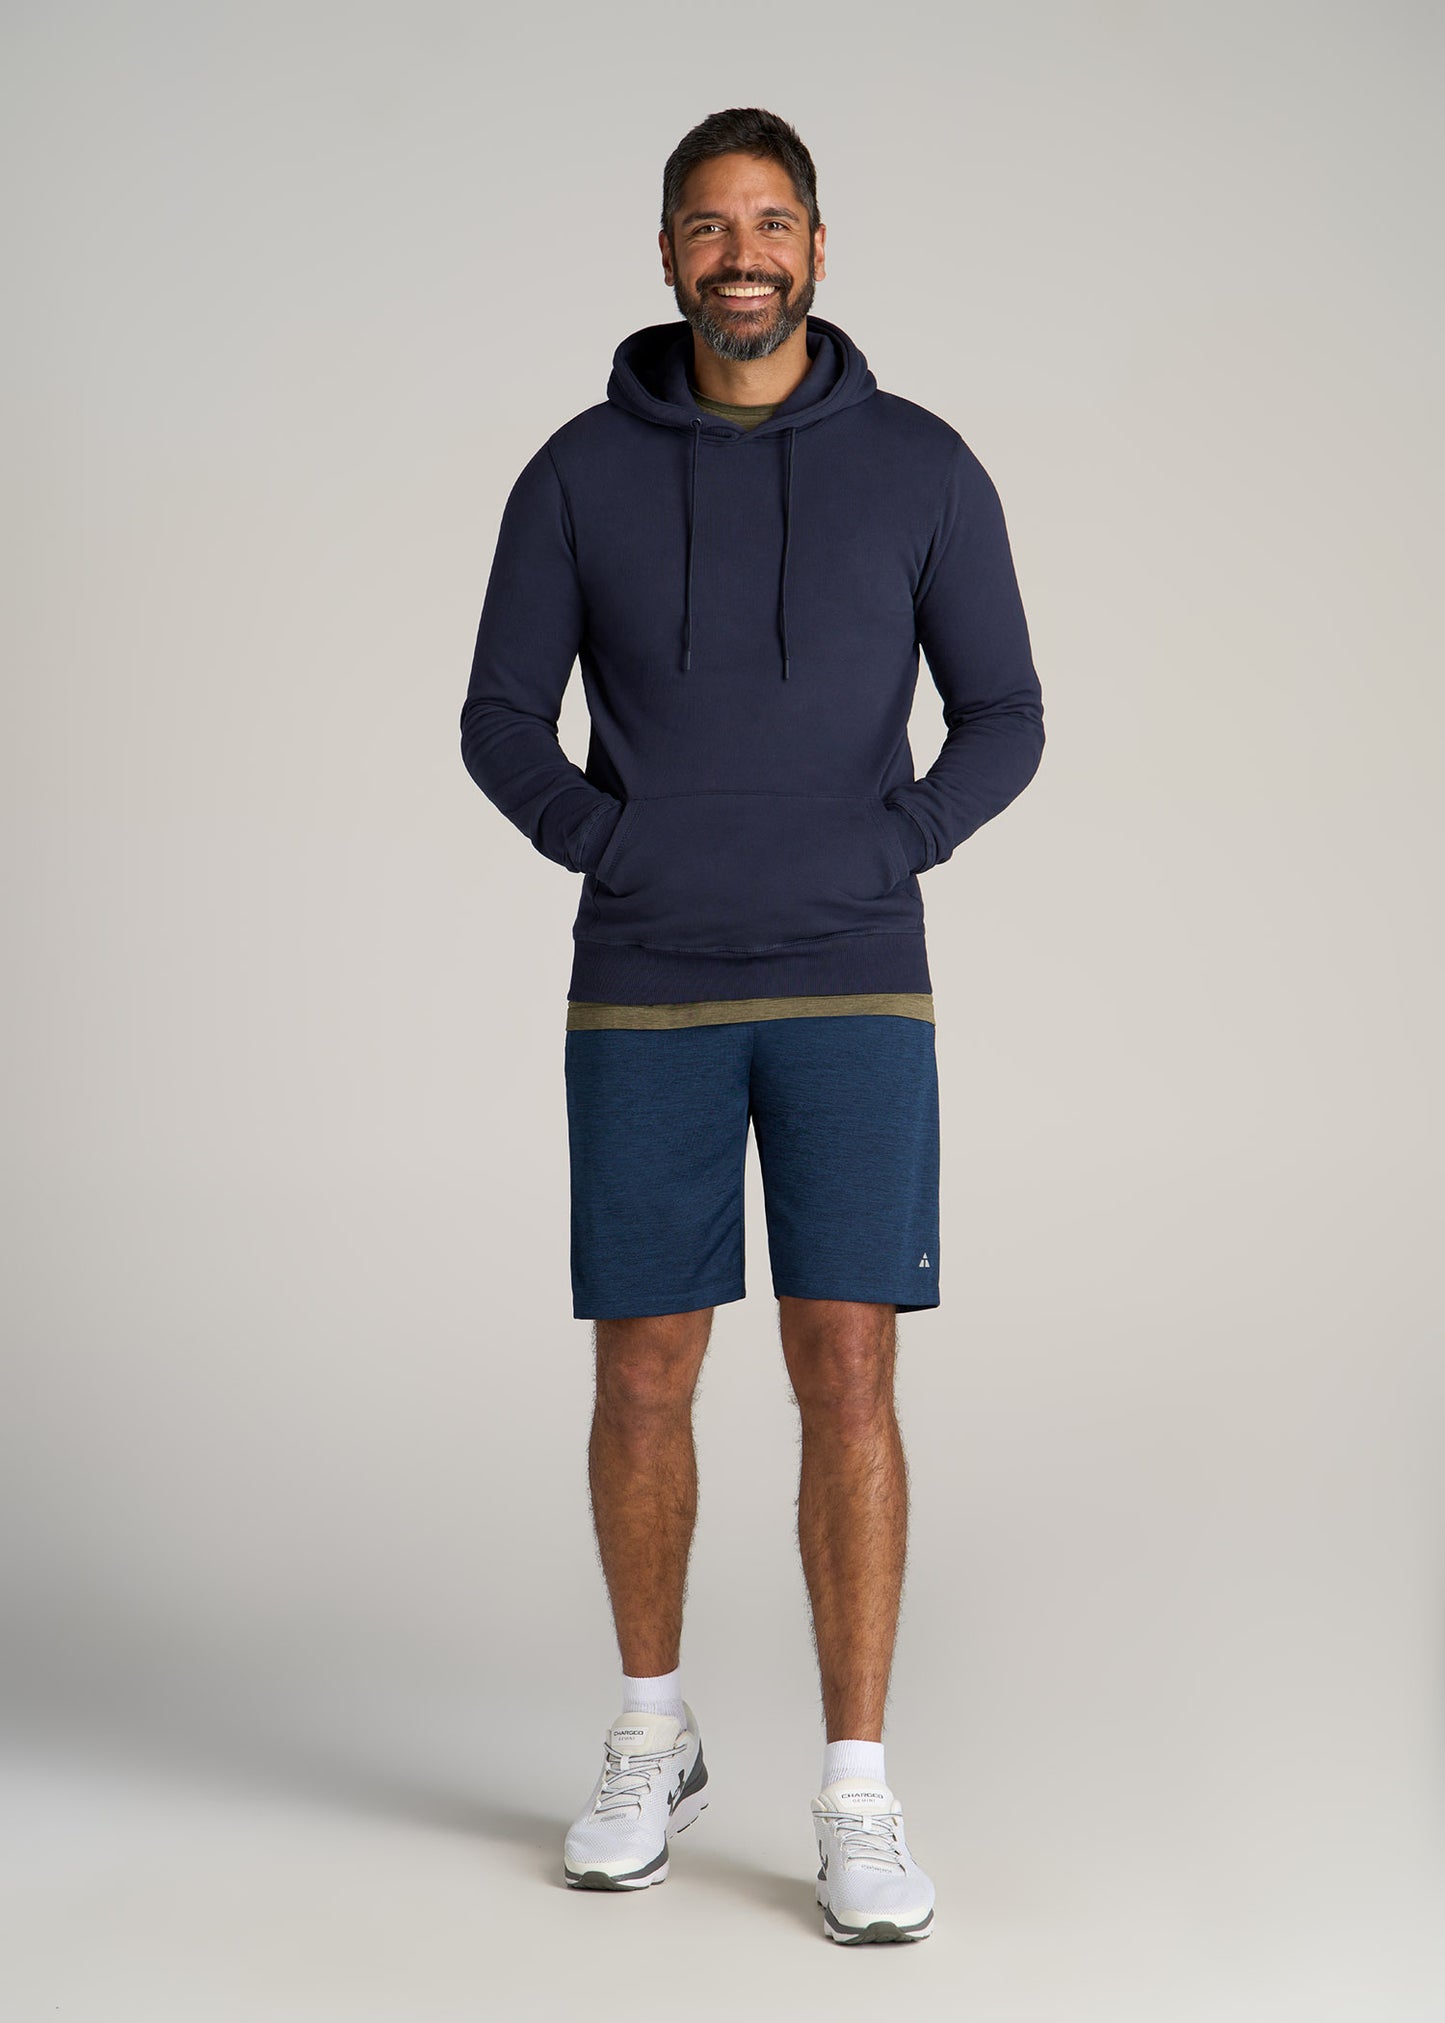 American-Tall-Men-AT-Performance-Engineered-Athletic-Shorts-Navy-Mix-full